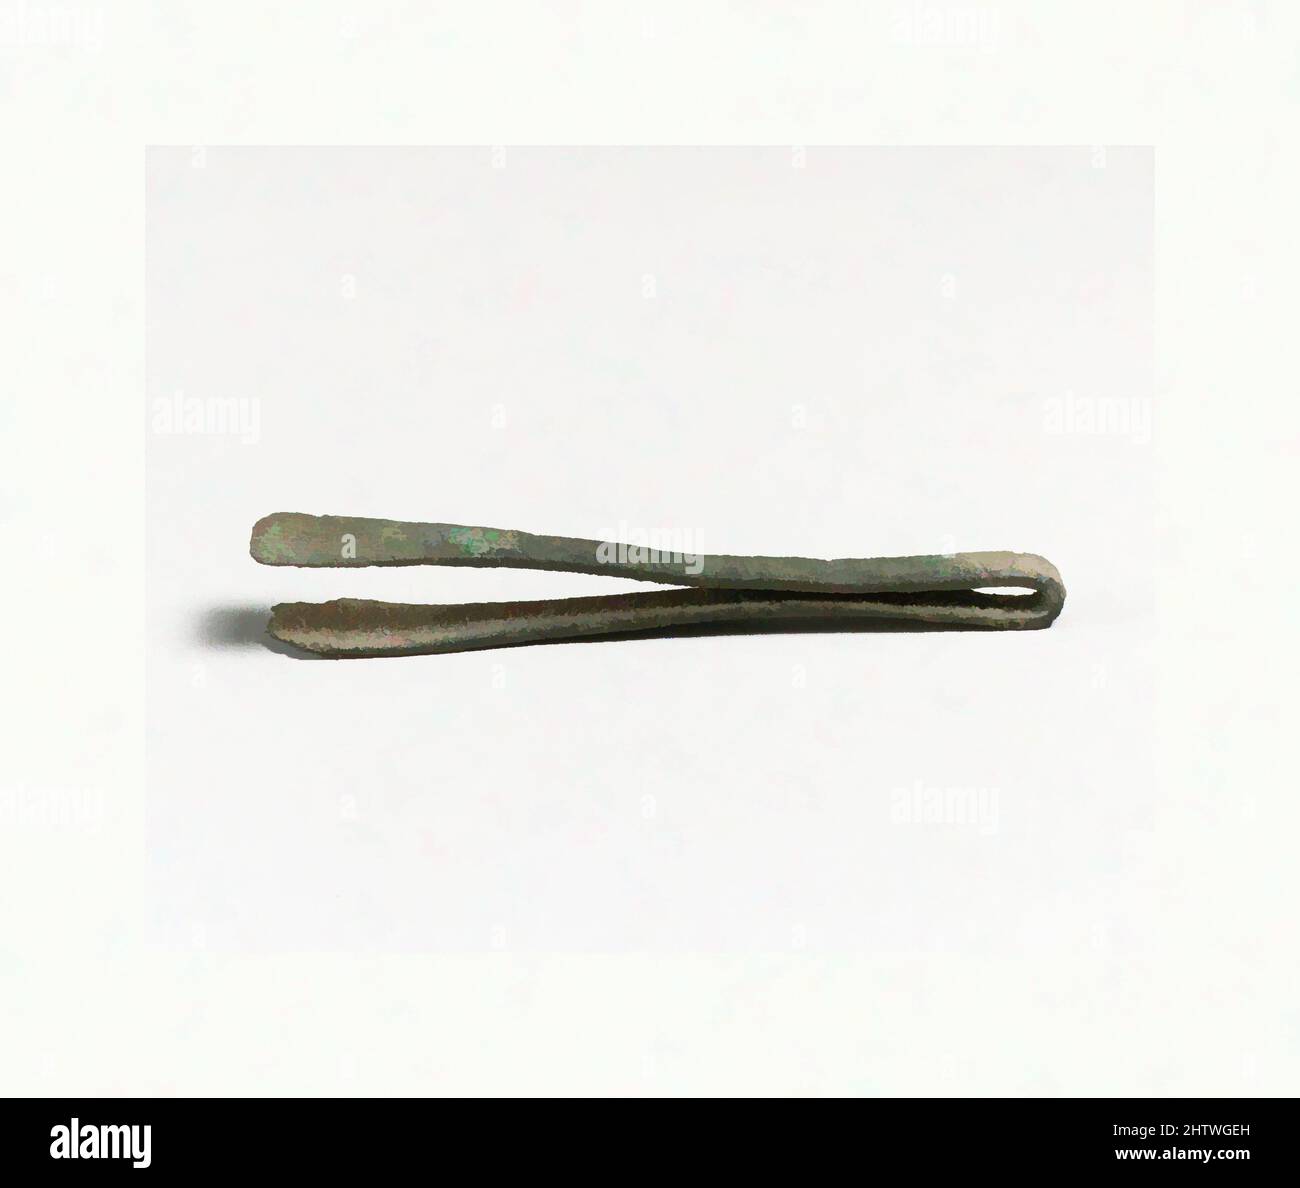 Art inspired by Tweezers, Early Bronze Age, ca. 3200–2000 B.C., Cypriot, Bronze, Other: 2 13/16in. (7.1cm), Bronzes, Classic works modernized by Artotop with a splash of modernity. Shapes, color and value, eye-catching visual impact on art. Emotions through freedom of artworks in a contemporary way. A timeless message pursuing a wildly creative new direction. Artists turning to the digital medium and creating the Artotop NFT Stock Photo